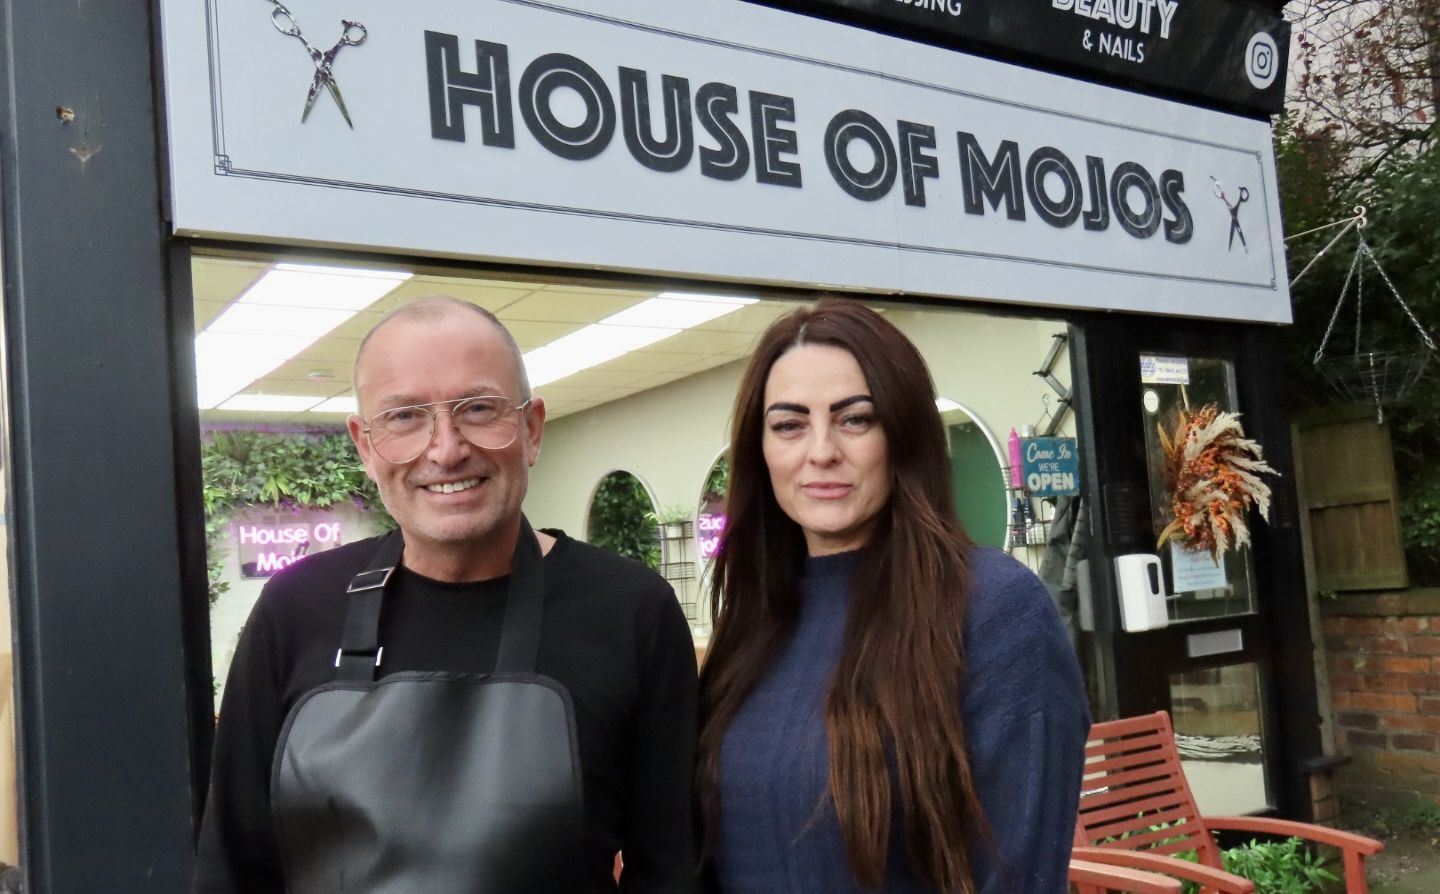 House of Mojos owner Lesley Morgan-Macbain with Senior Stylist Paul Harrison. Photo by Andrew Brown Media